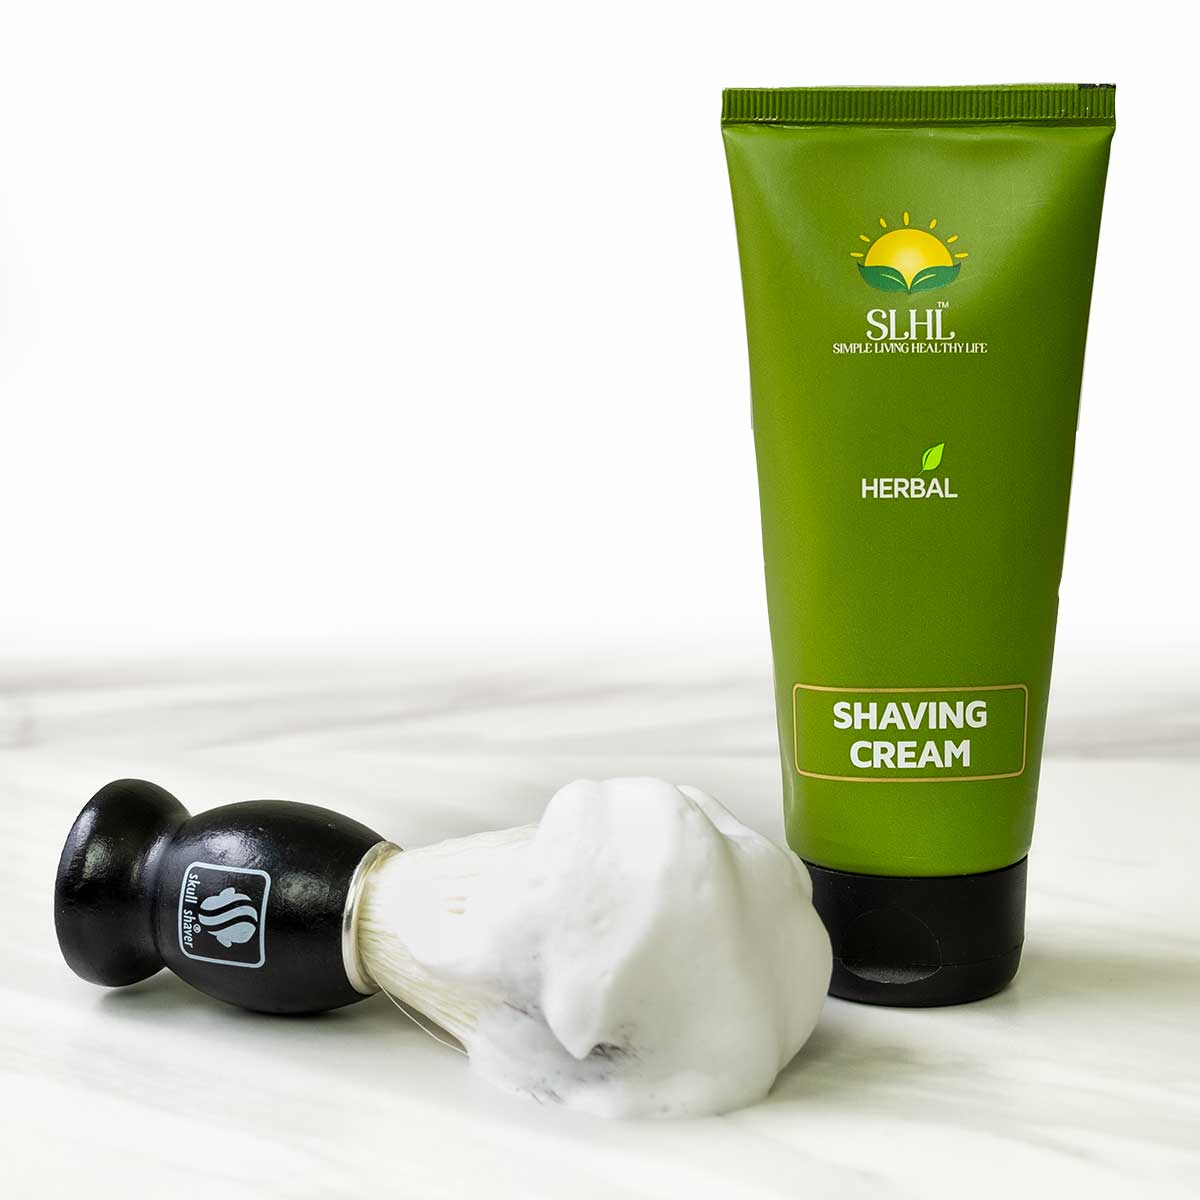 simple living healthy life herbal shaving cream works best when used with a shaving brush to work up a luxurious lather